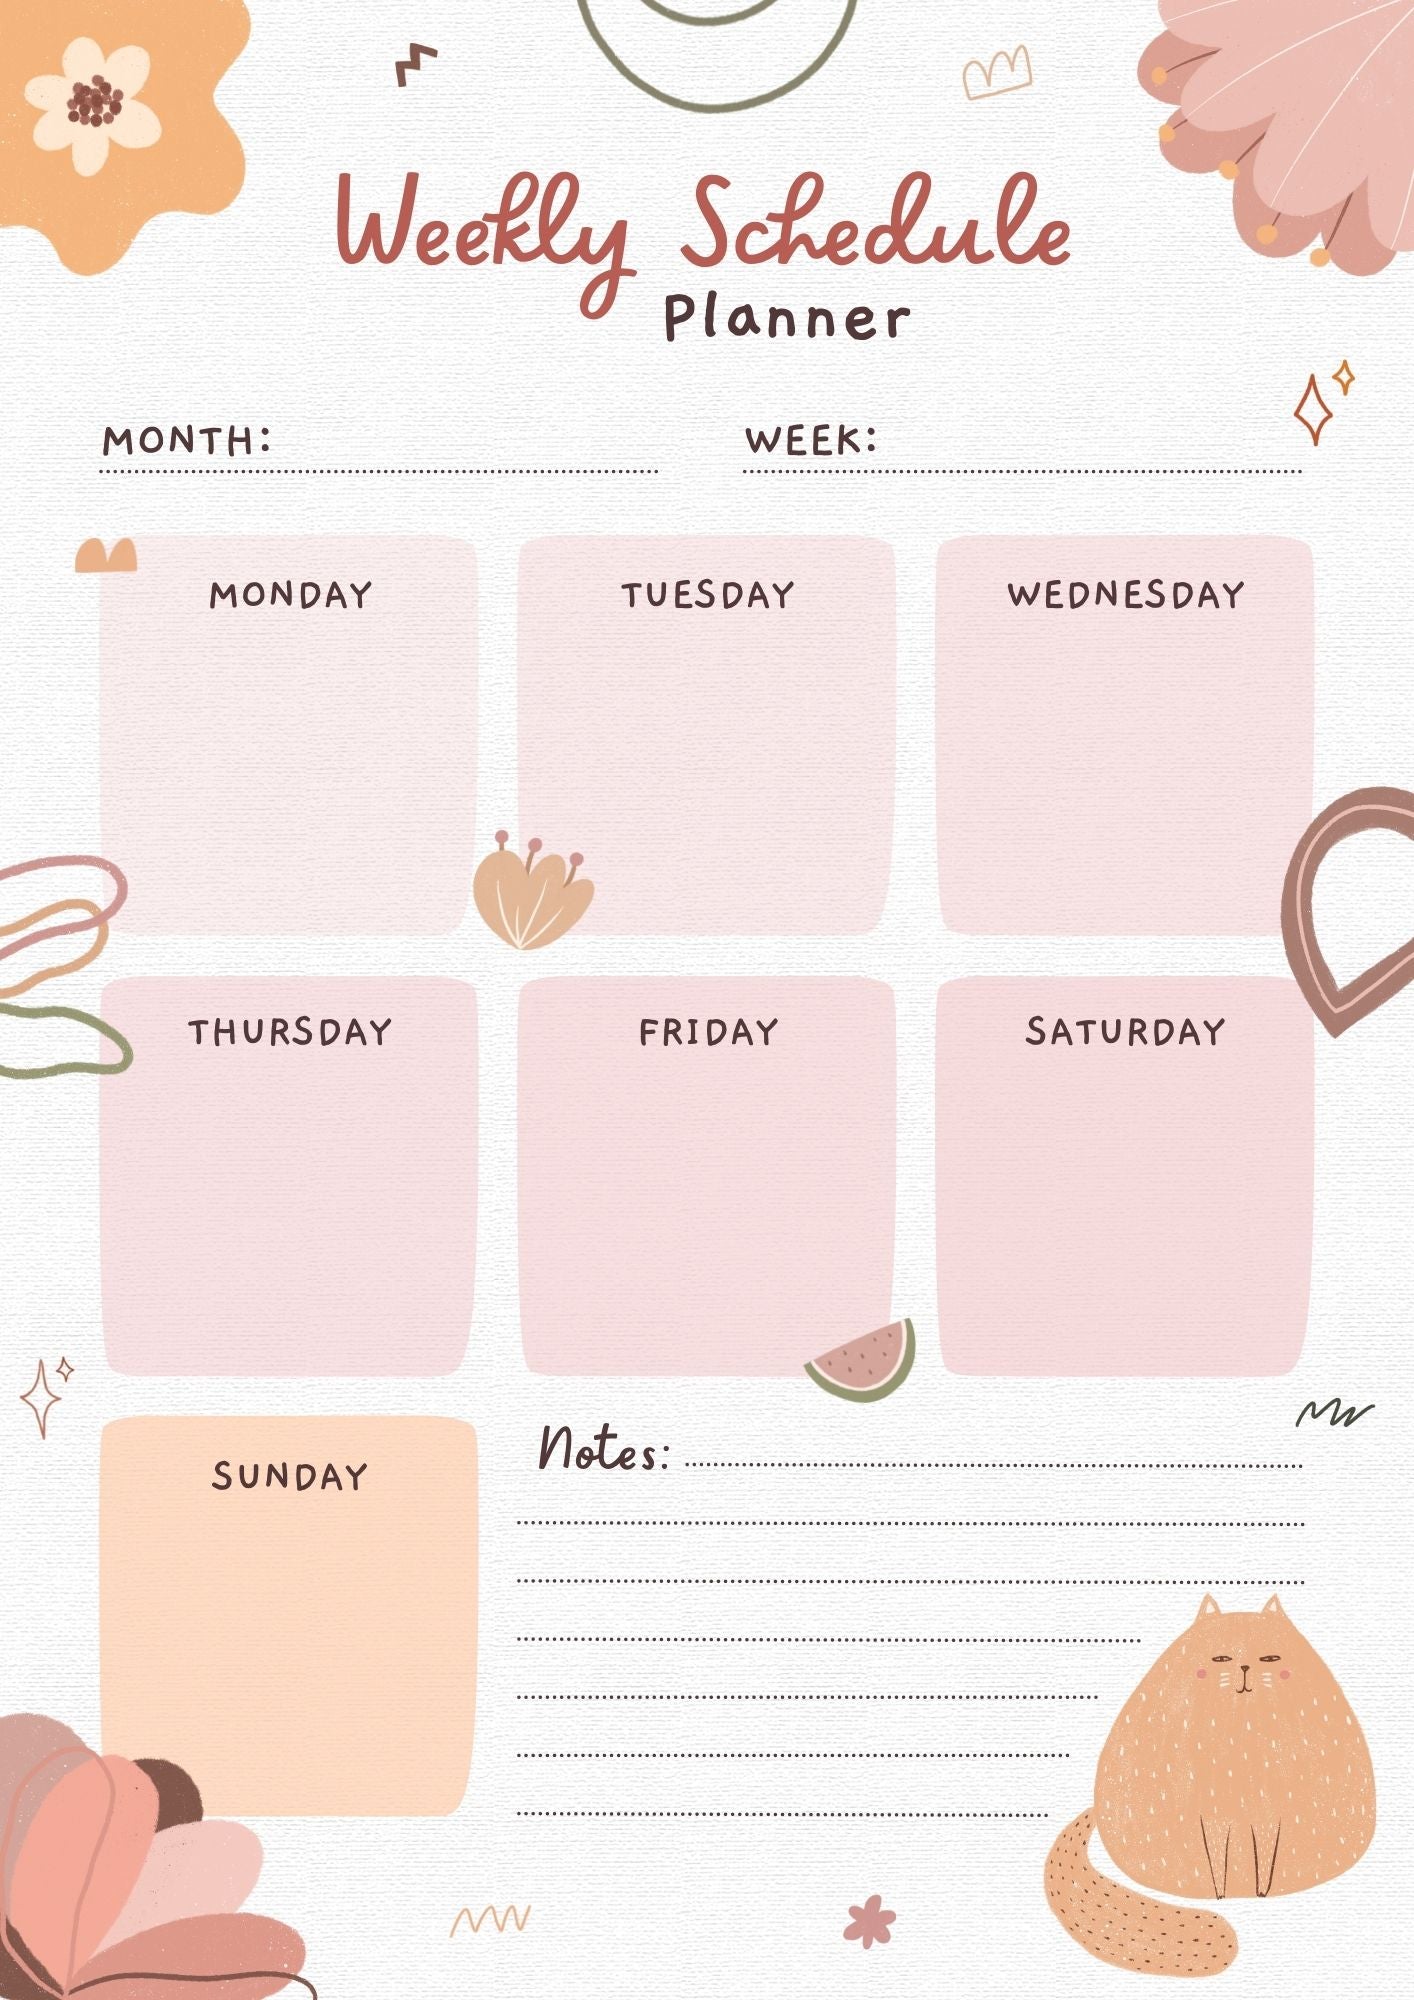 My Daily Planner Appointment Book - pdf printout (DIGITAL DOWNLOAD ONLY)